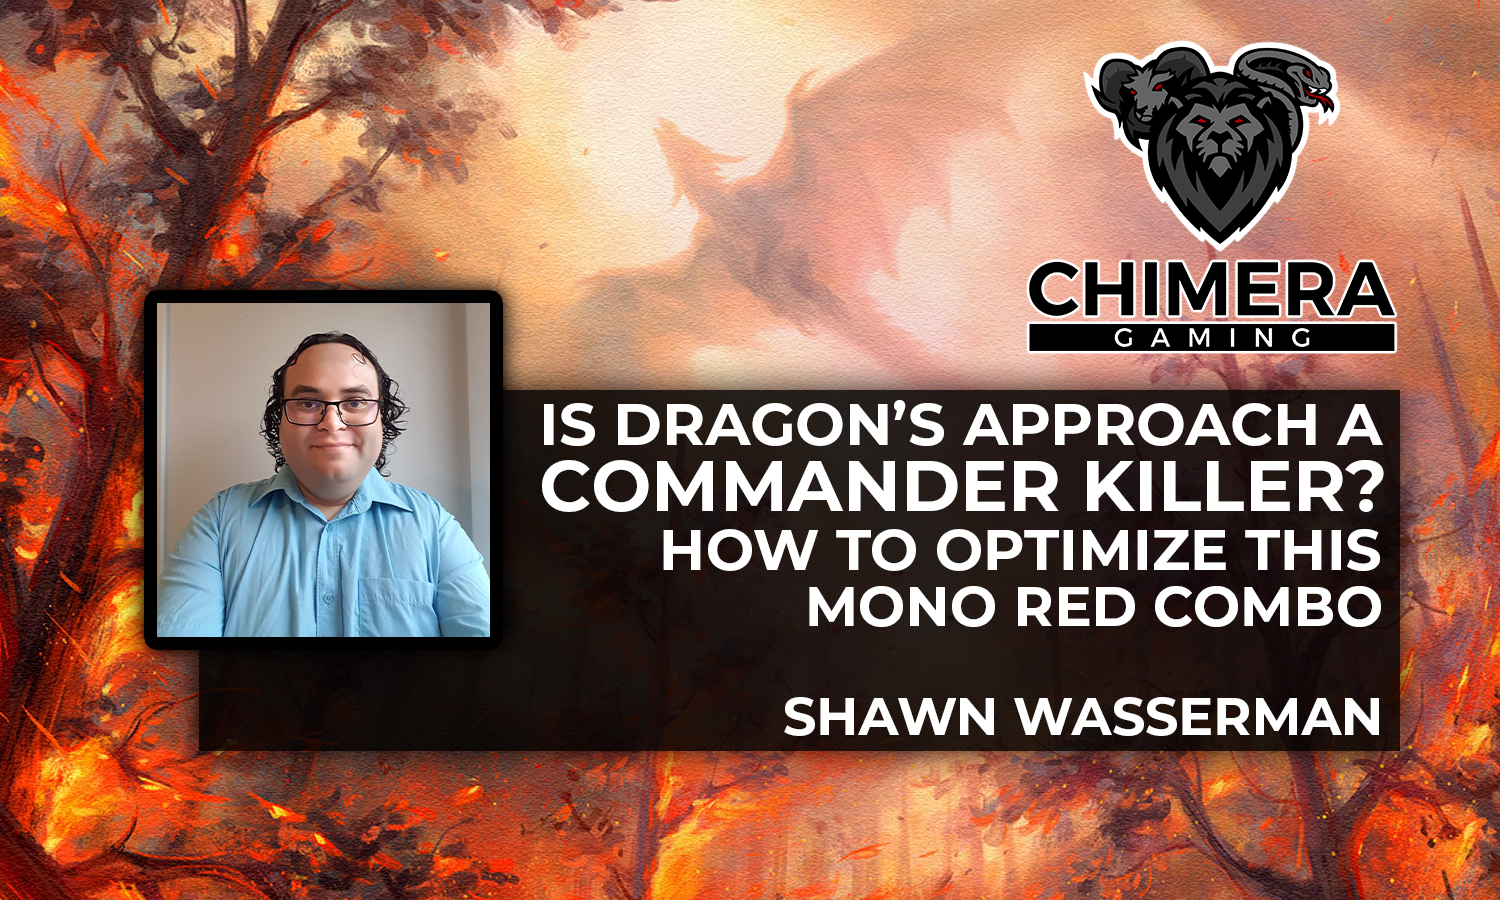 Is Dragon's Approach a Commander Killer? How to Optimize this Mono Red Combo. By Shawn Wasserman